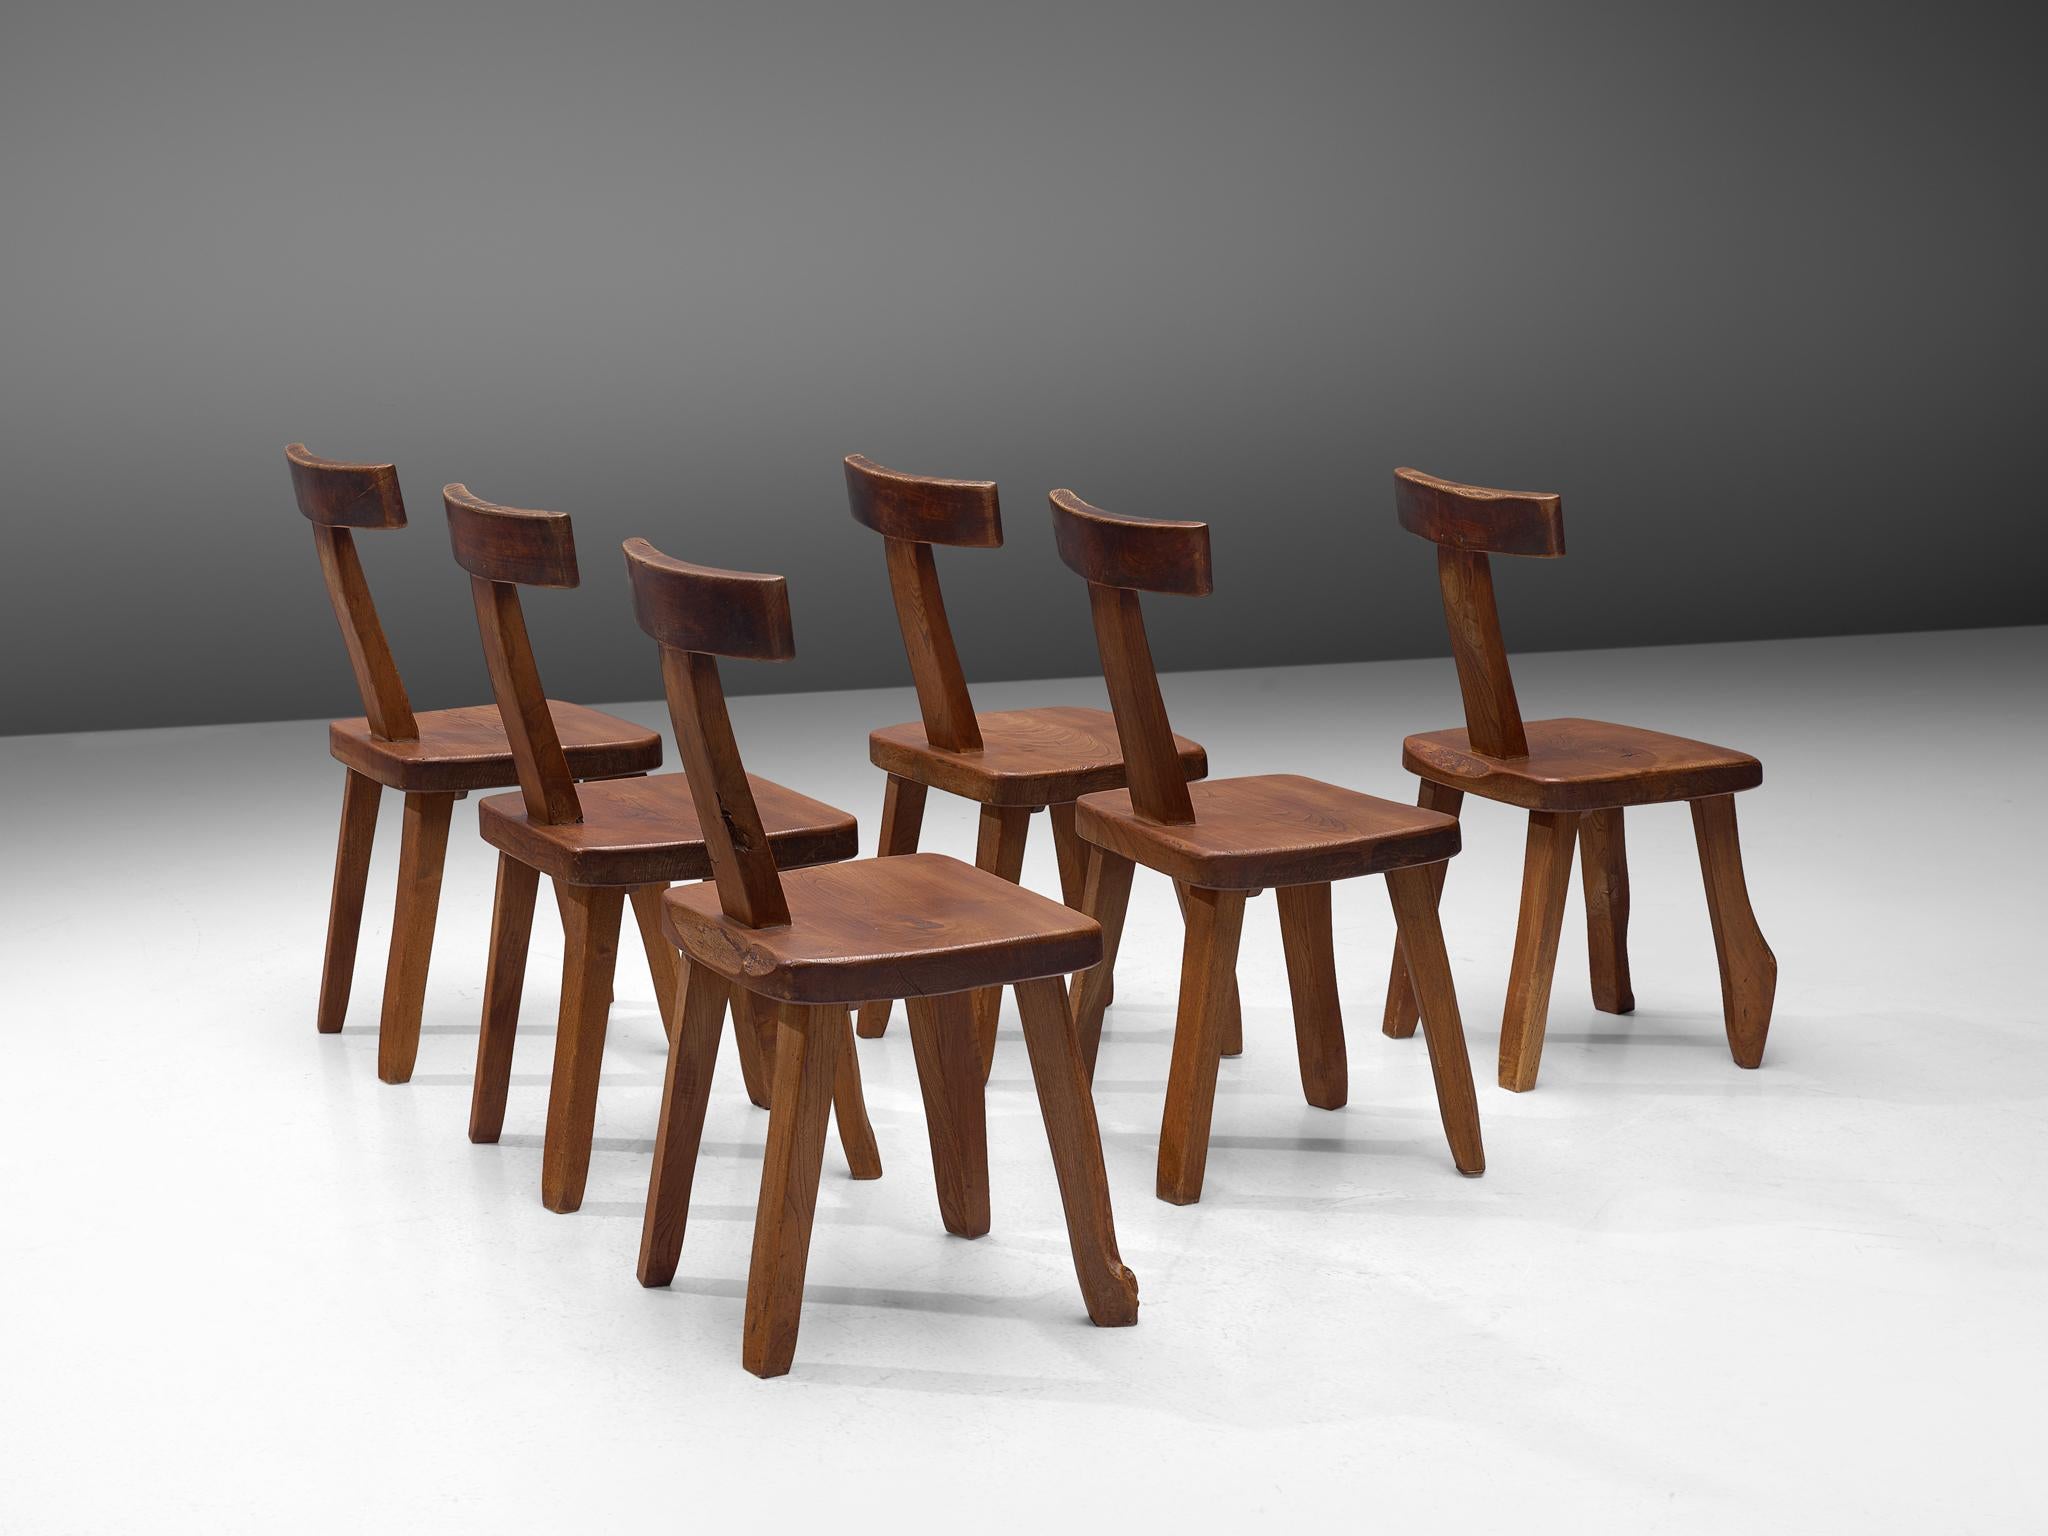 Olavi Hänninen for Mikko Nupponen, set of 6 dining chairs, stained elmwood, Finland, 1950.

Robust sculptural side chairs designed by Olavi Hanninen and manufactured by Mikko Nupponen. These chairs are made of stained elm wood and sculpturally